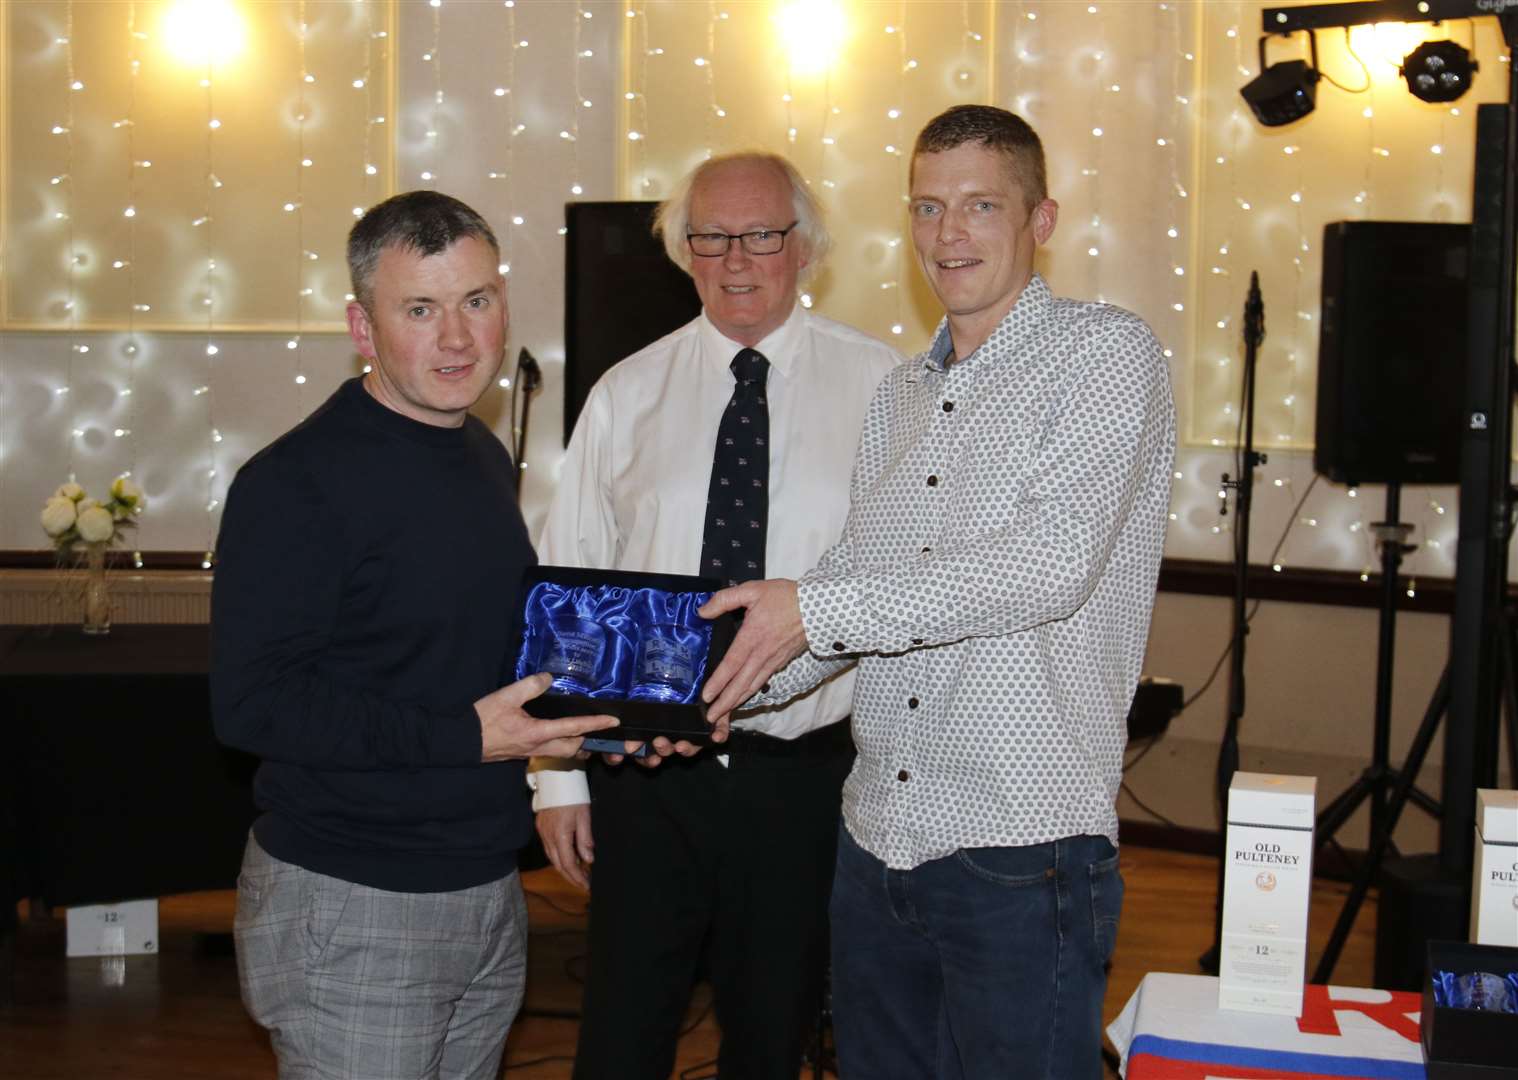 RNLI volunteer David Malcolm accepting his award from coxswain Allan Lipp, along with Murray Lamont, chairman of the Wick lifeboat management committee.